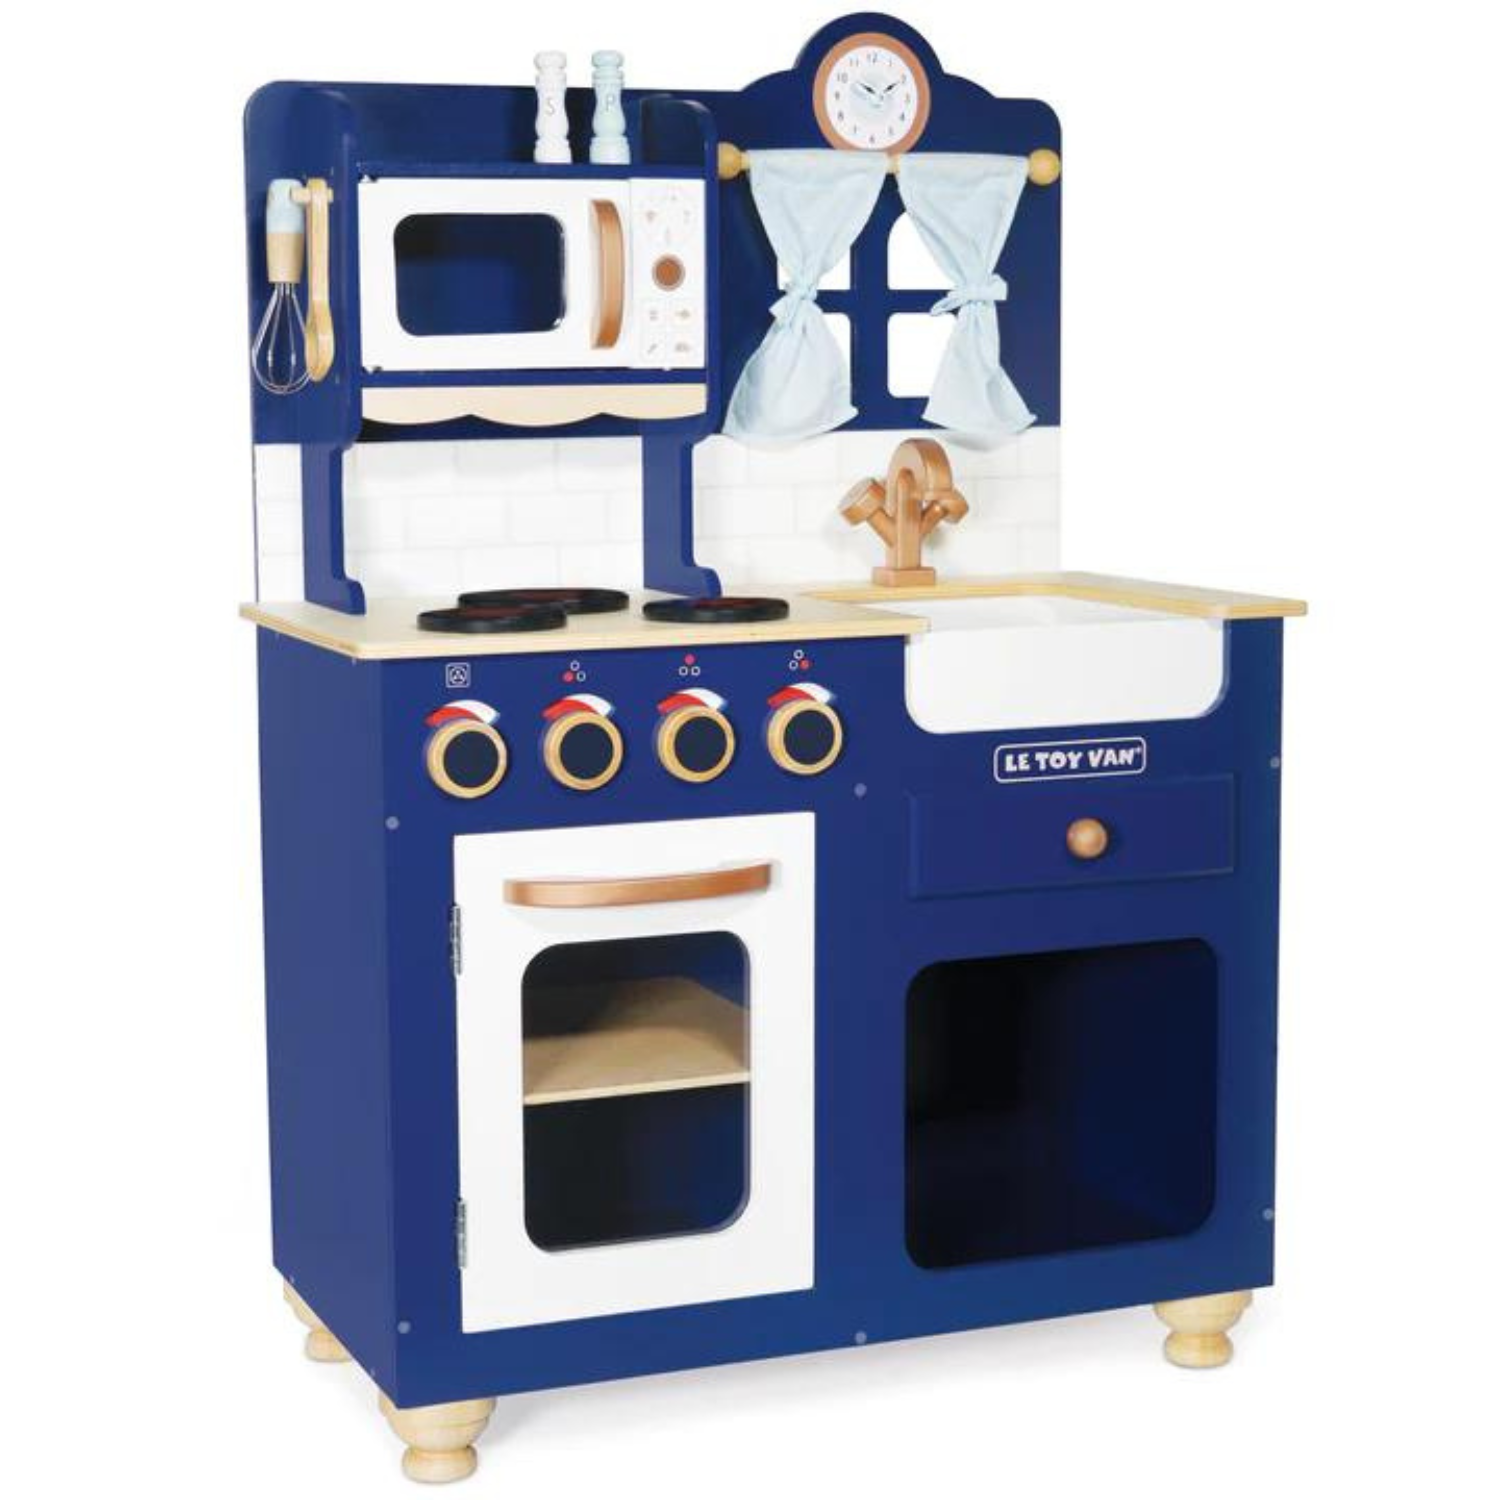 An image of Le Toy Van Wooden Play Kitchen for Children - Royal Blue